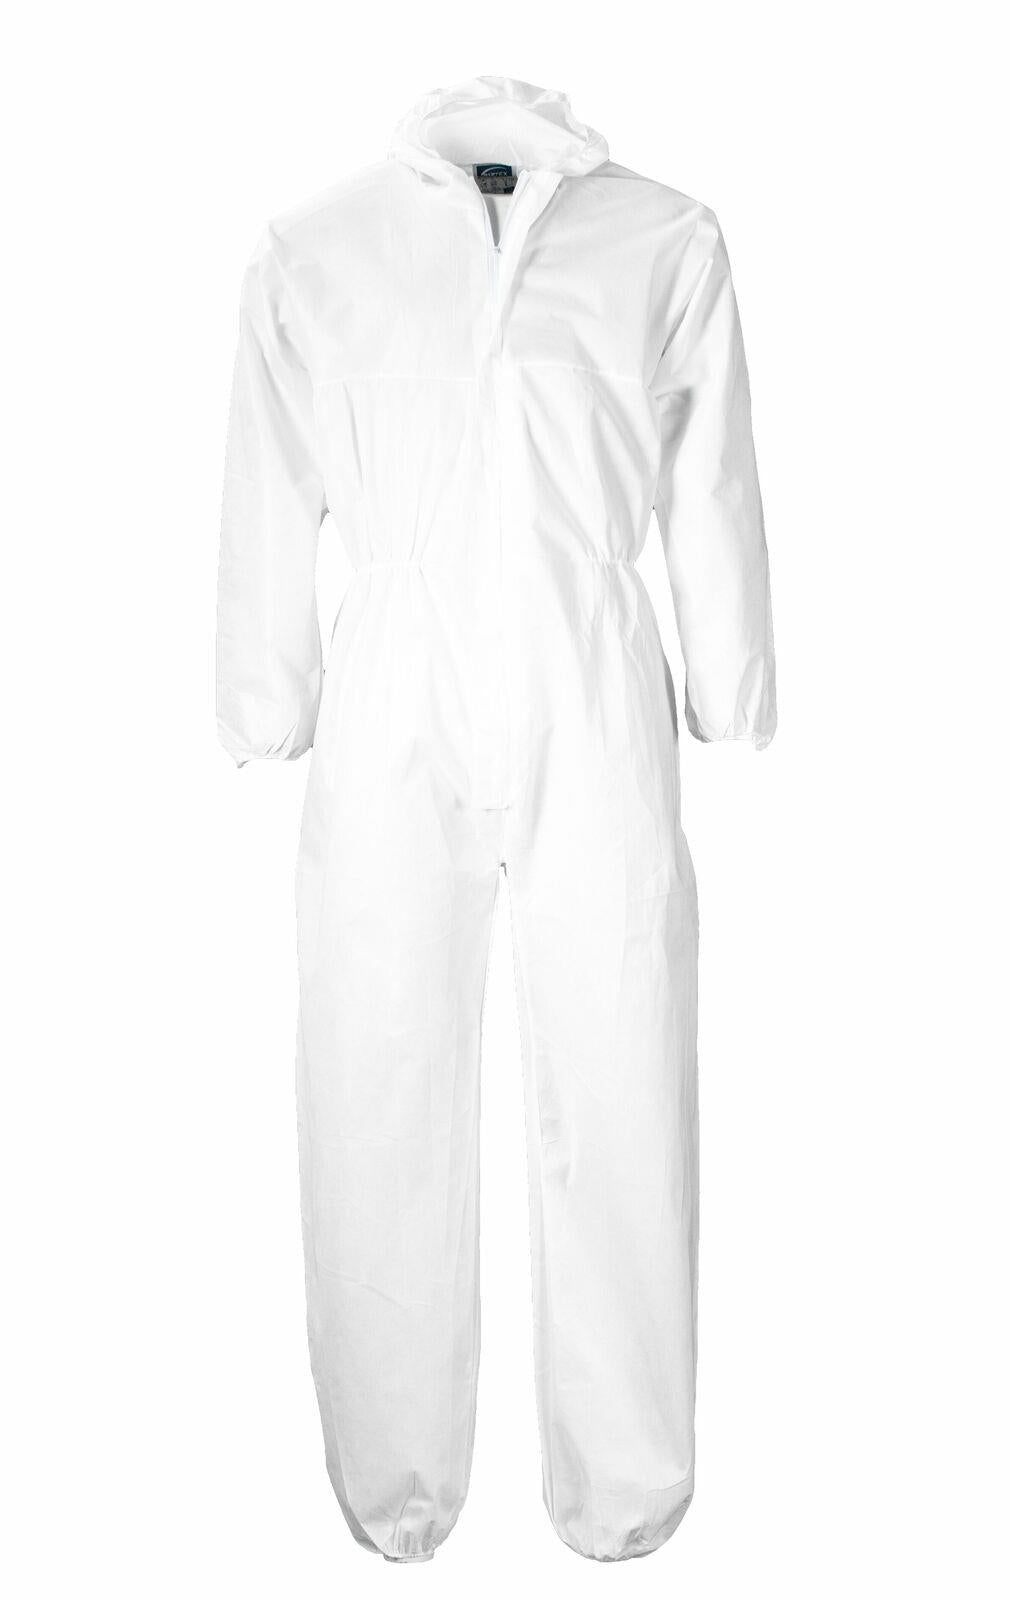 Portwest white 40g polypropylene builder's lofts hooded disposable coverall #ST11